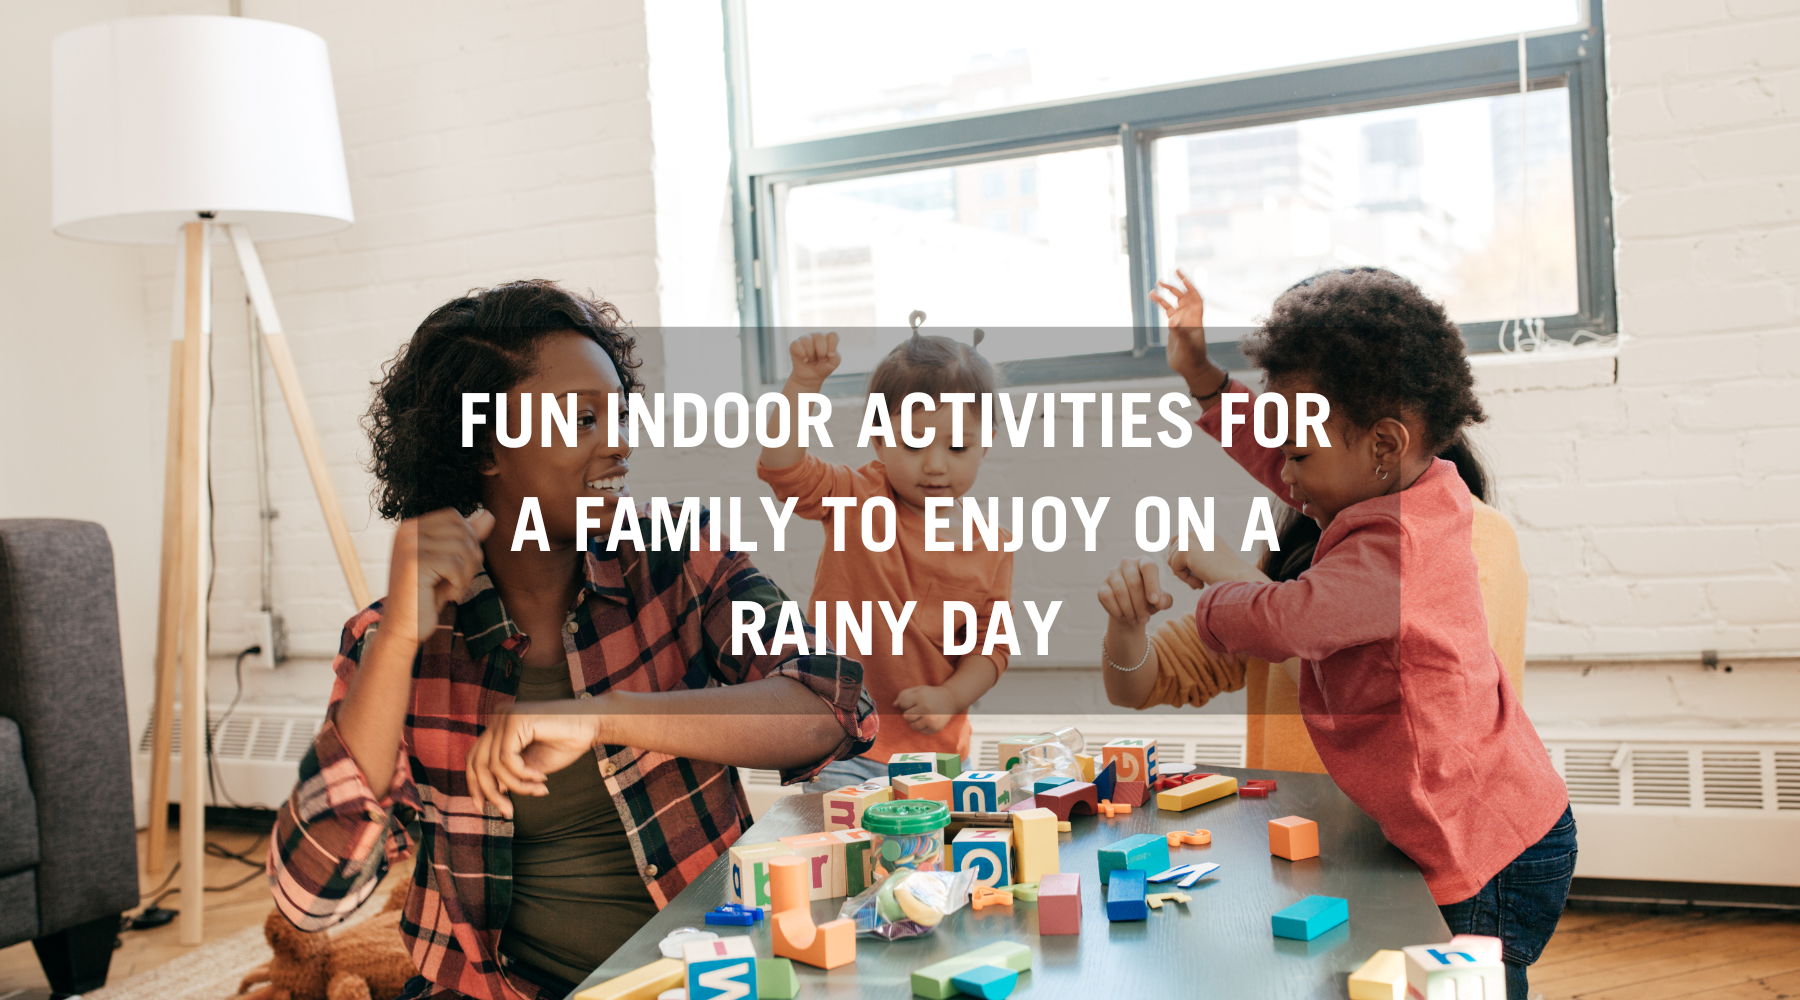 Some fun indoor activities for a family to enjoy on a rainy day